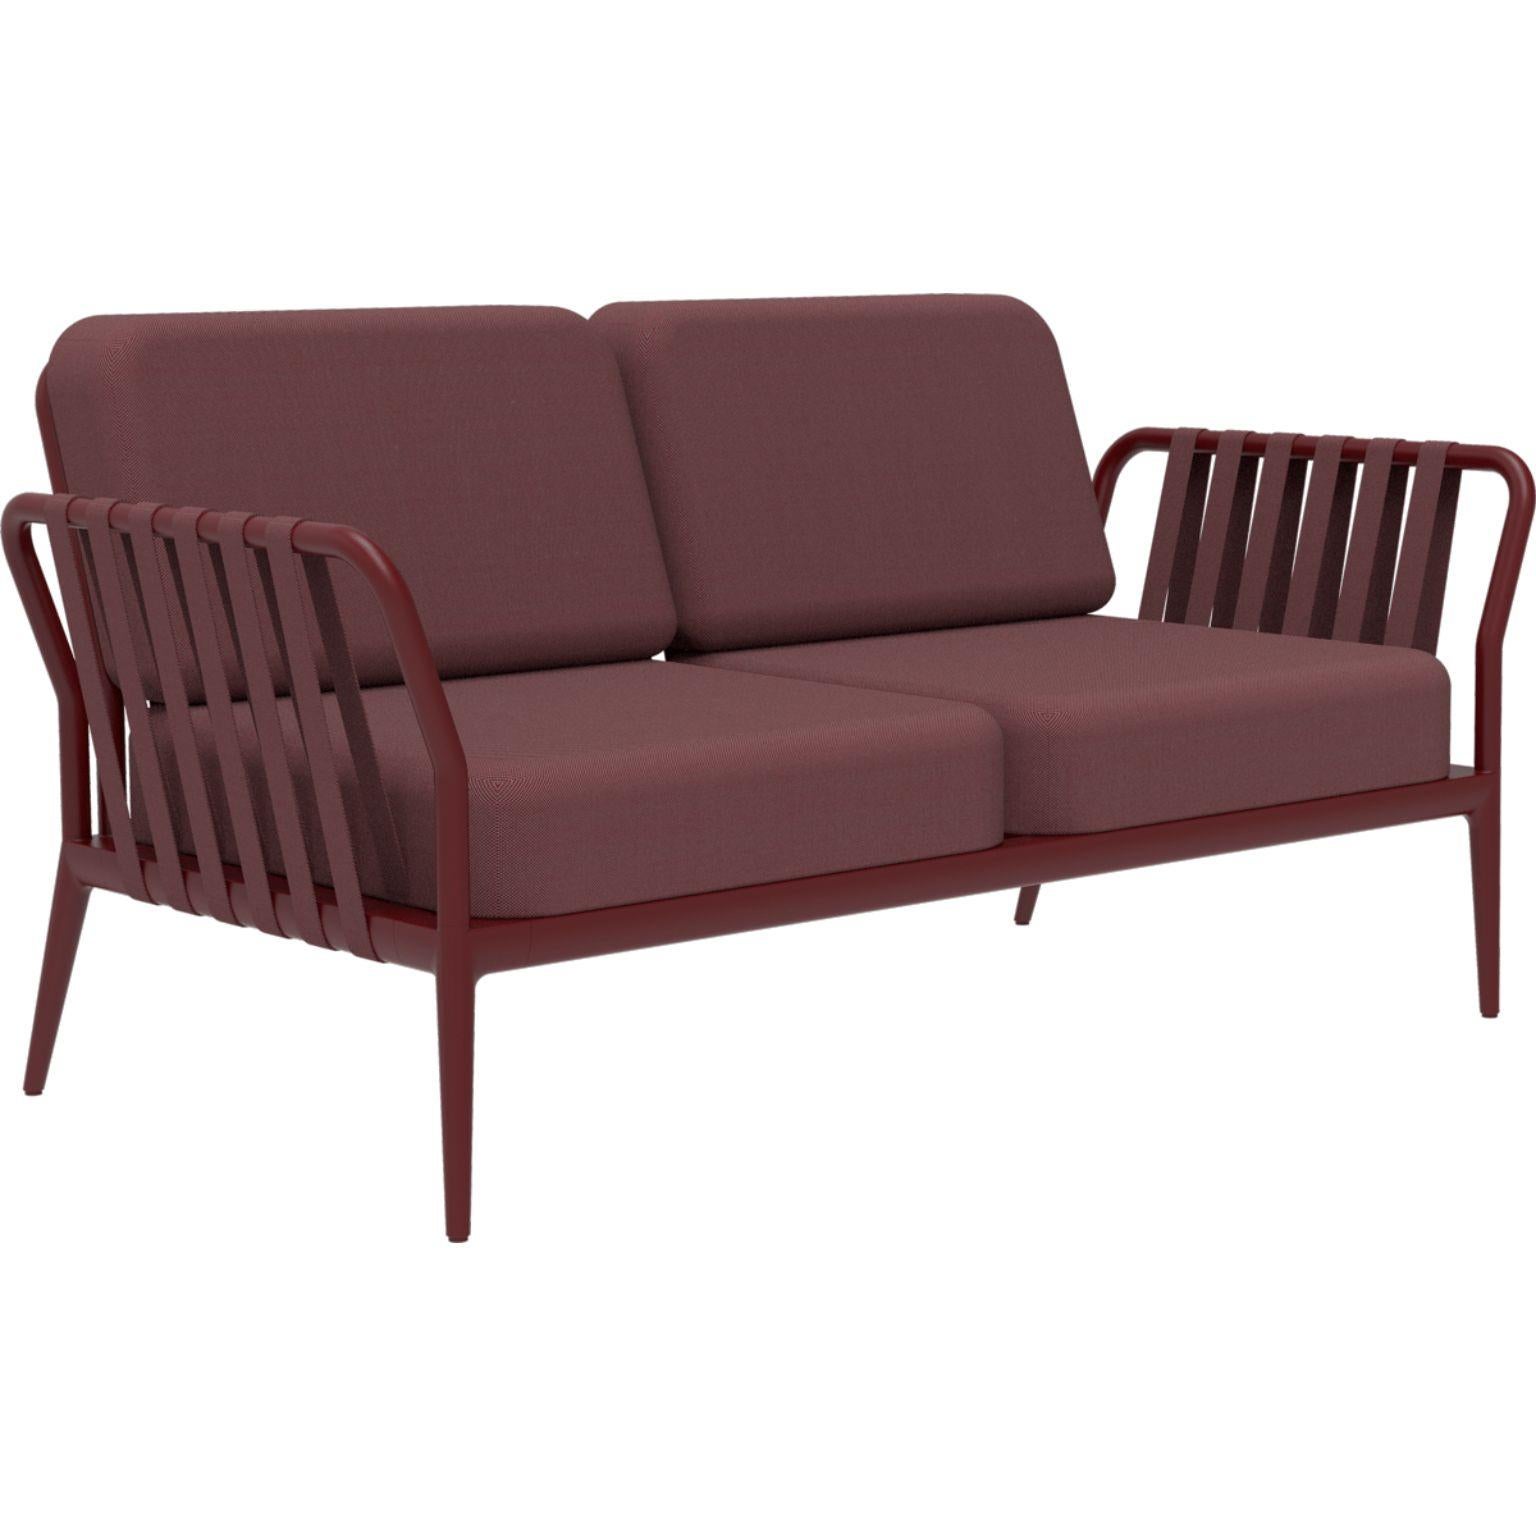 Ribbons burgundy sofa by Mowee.
Dimensions: D83 x W160 x H81 cm.
Material: Aluminium, upholstery.
Weight: 32 kg
Also available in different colors and finishes.

An unmistakable collection for its beauty and robustness. A tribute to the